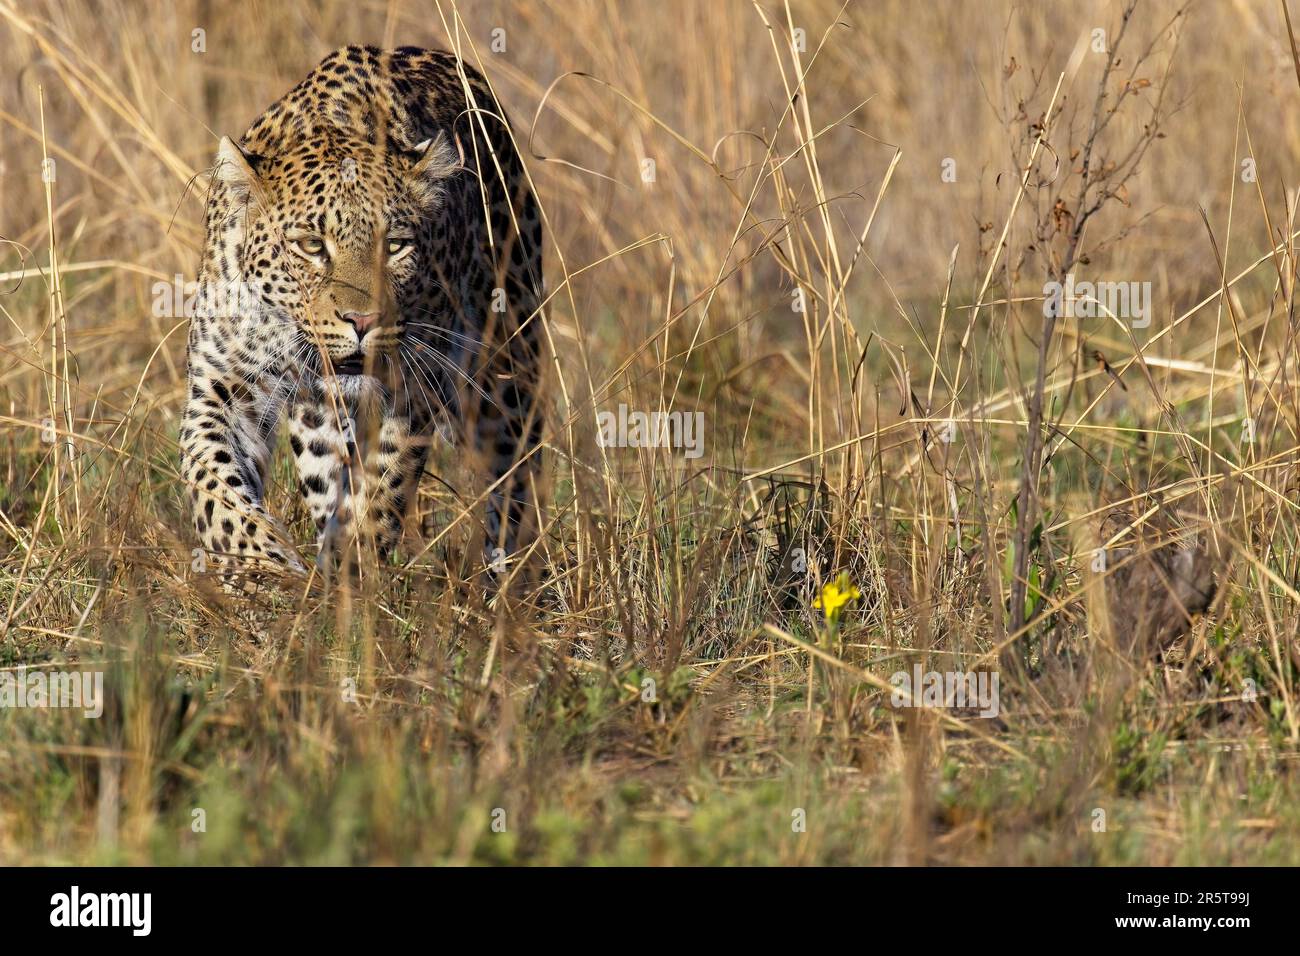 A wild leopard is walking through the tall, golden grass of its natural habitat, near another one of its species Stock Photo